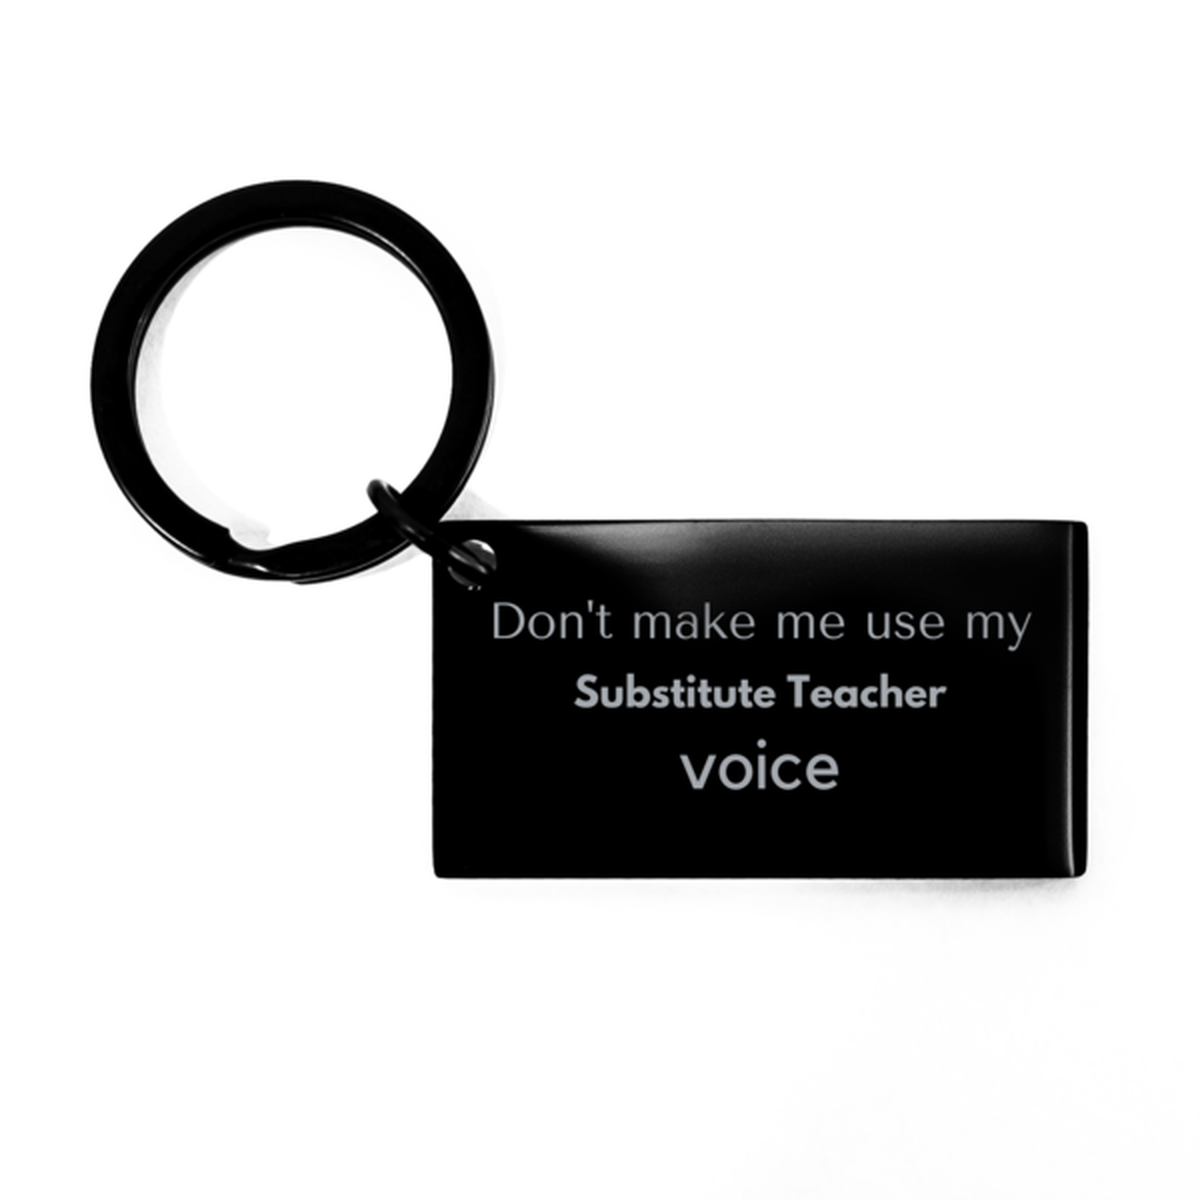 Don't make me use my Substitute Teacher voice, Sarcasm Substitute Teacher Gifts, Christmas Substitute Teacher Keychain Birthday Unique Gifts For Substitute Teacher Coworkers, Men, Women, Colleague, Friends